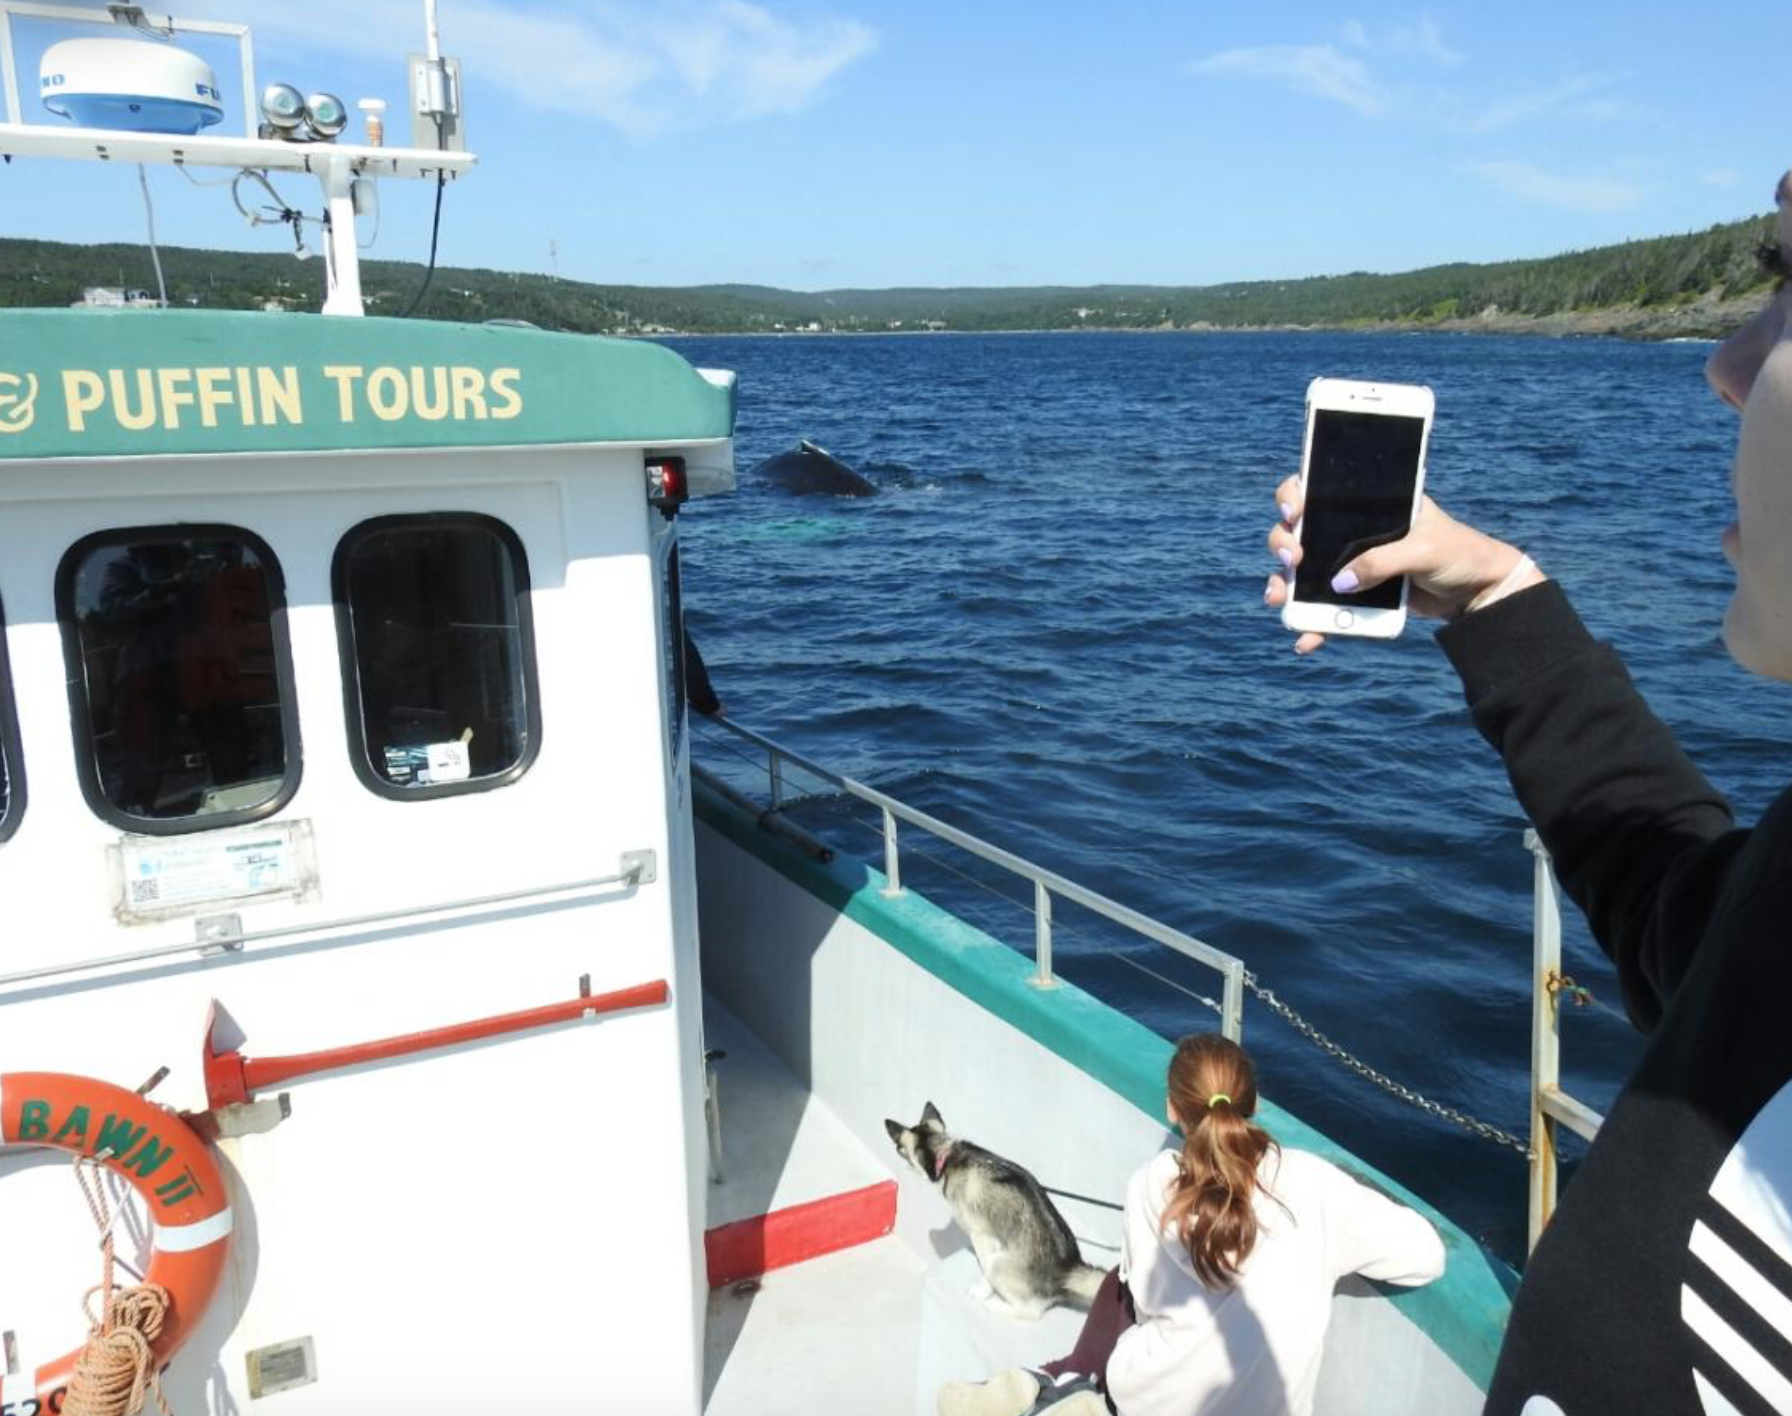 Molly Bawn Whale &amp; Puffin Tour - St. John's, Newfoundland and Labrador, Canada